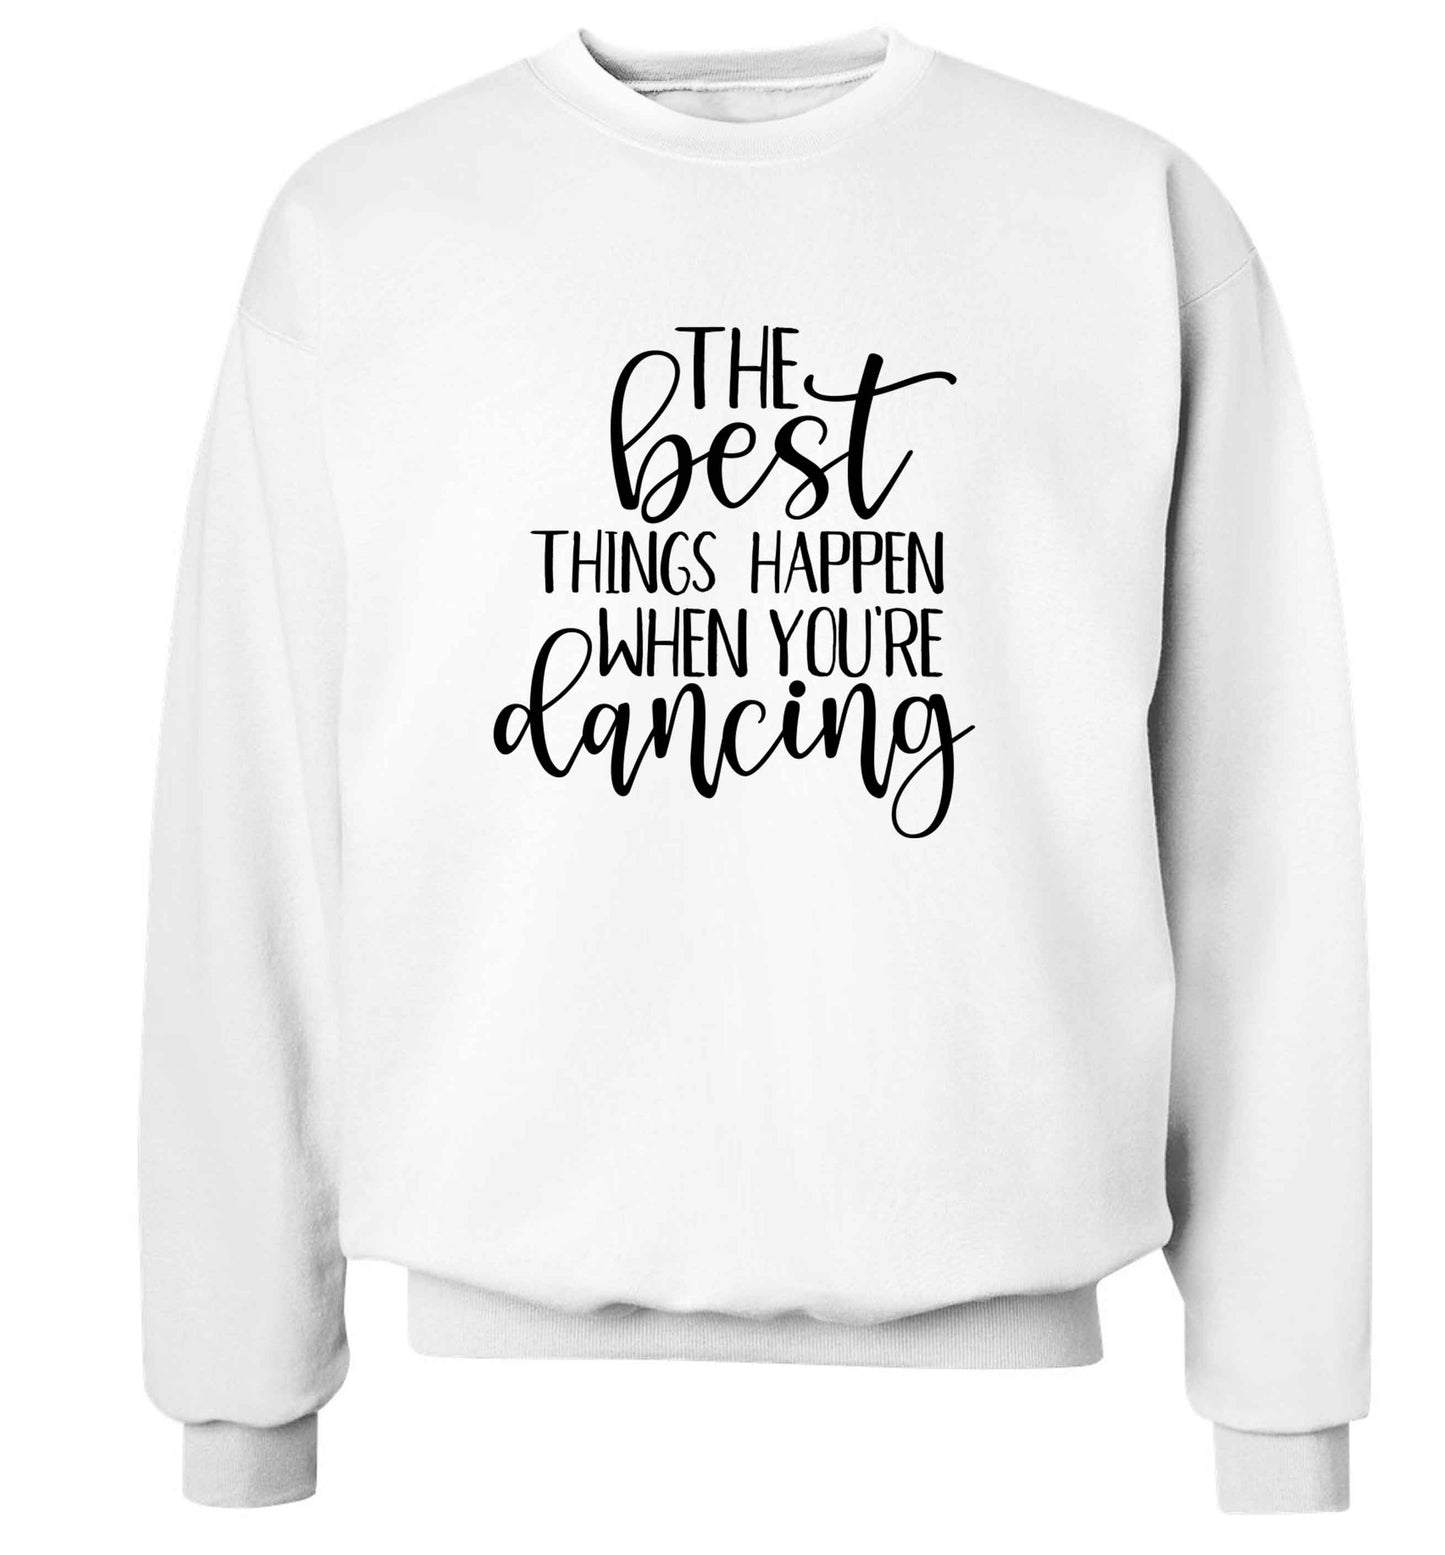 Best Things Happen Dancing adult's unisex white sweater 2XL